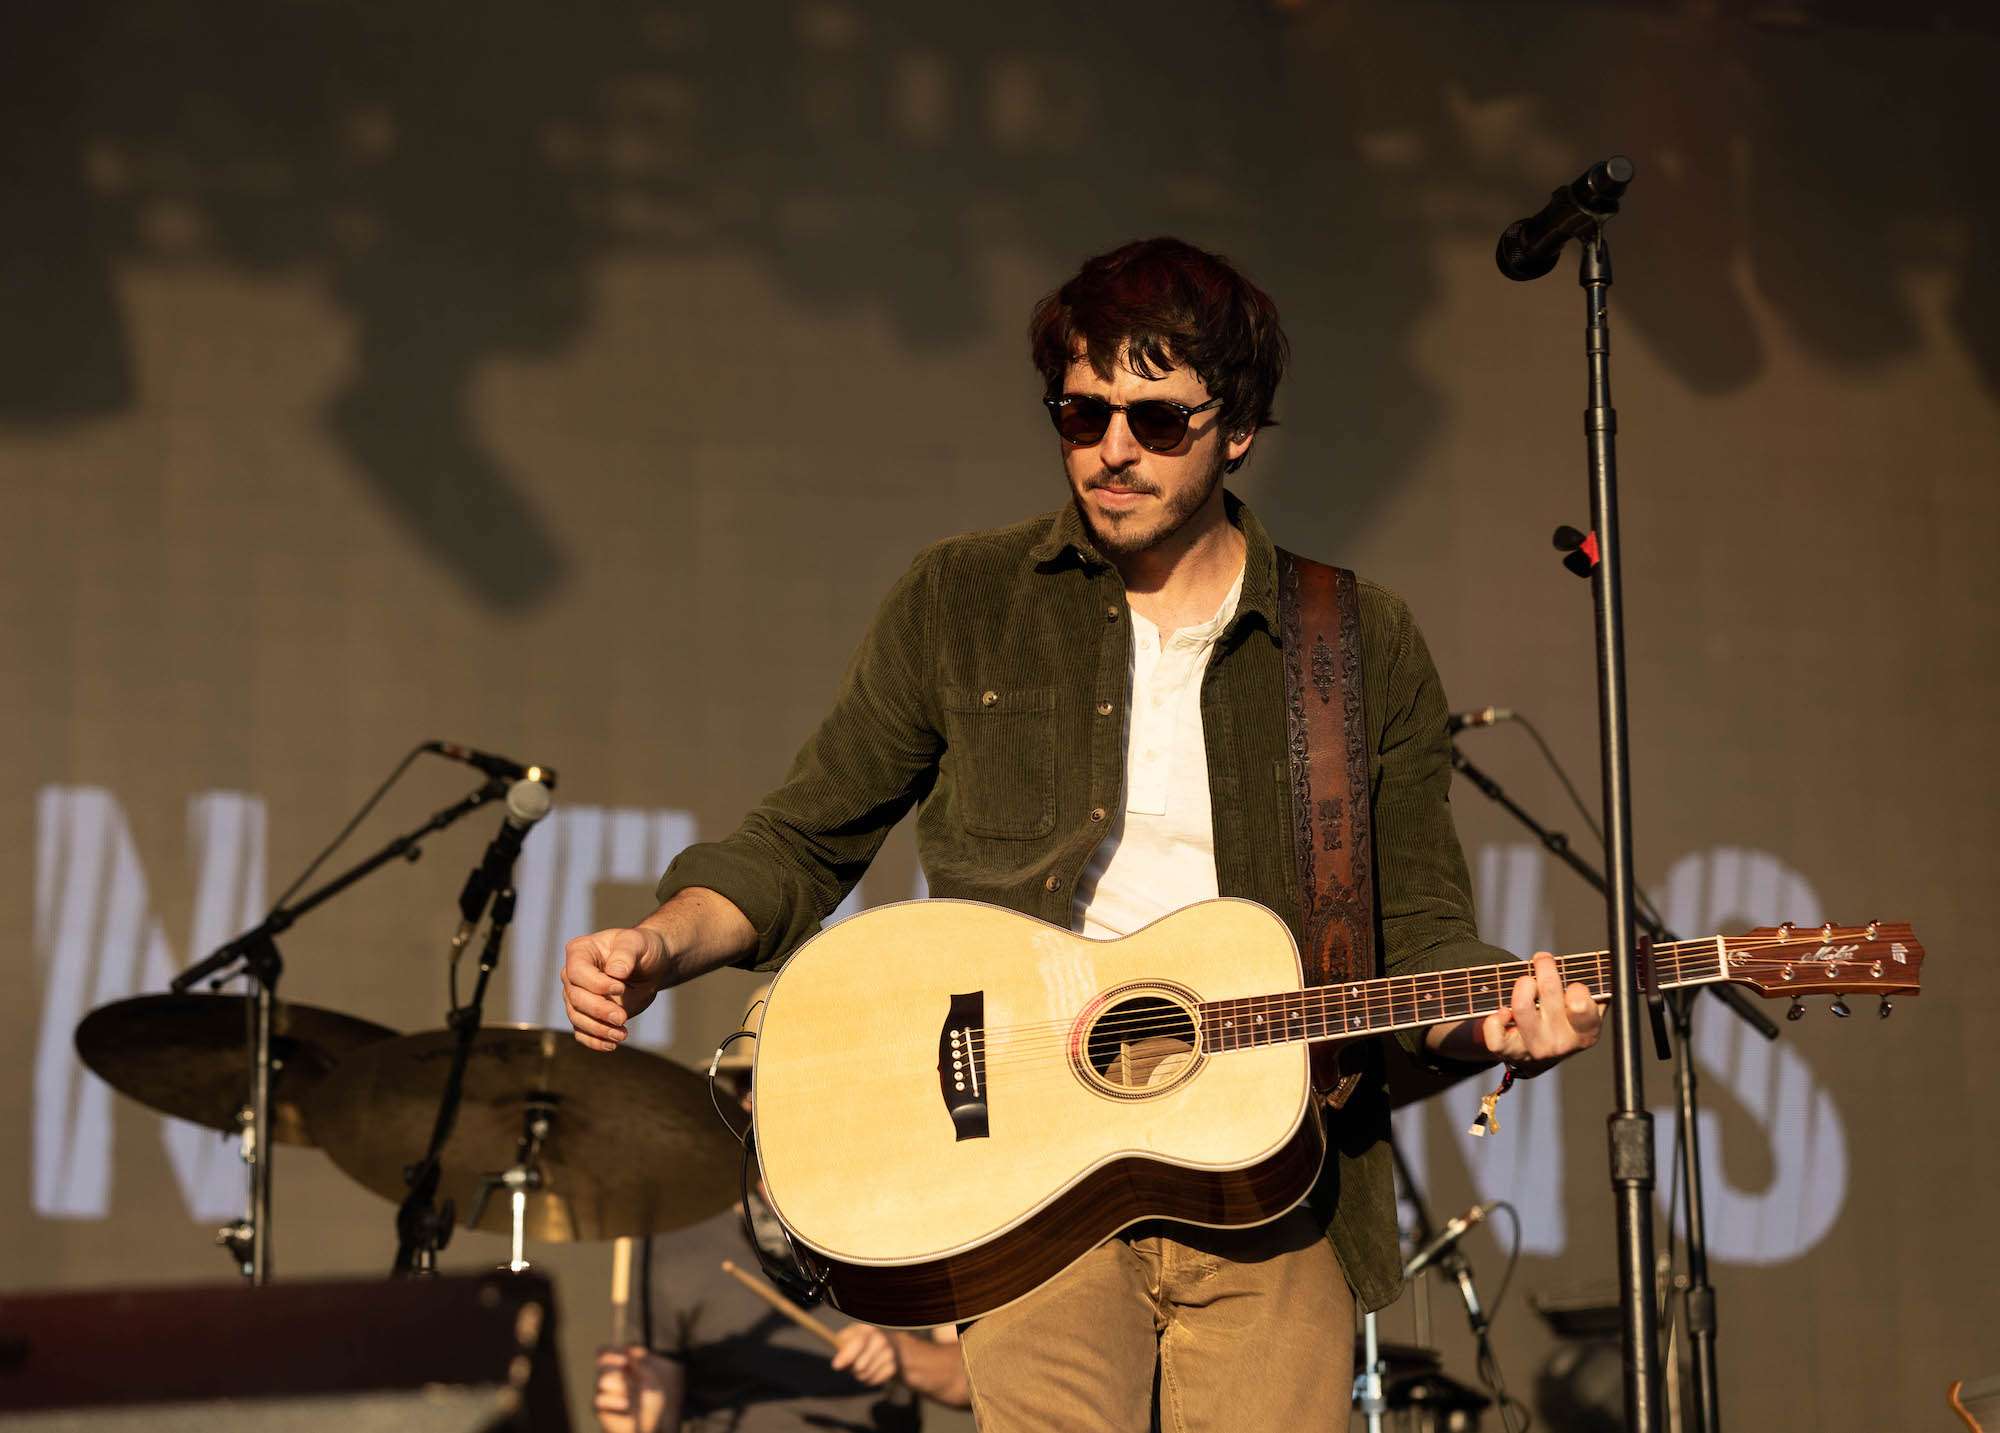 Morgan Evans - Windy City Smokeout - Chicago, IL - 07/9/2021 - Photo © 2021 by: Frank Griseta